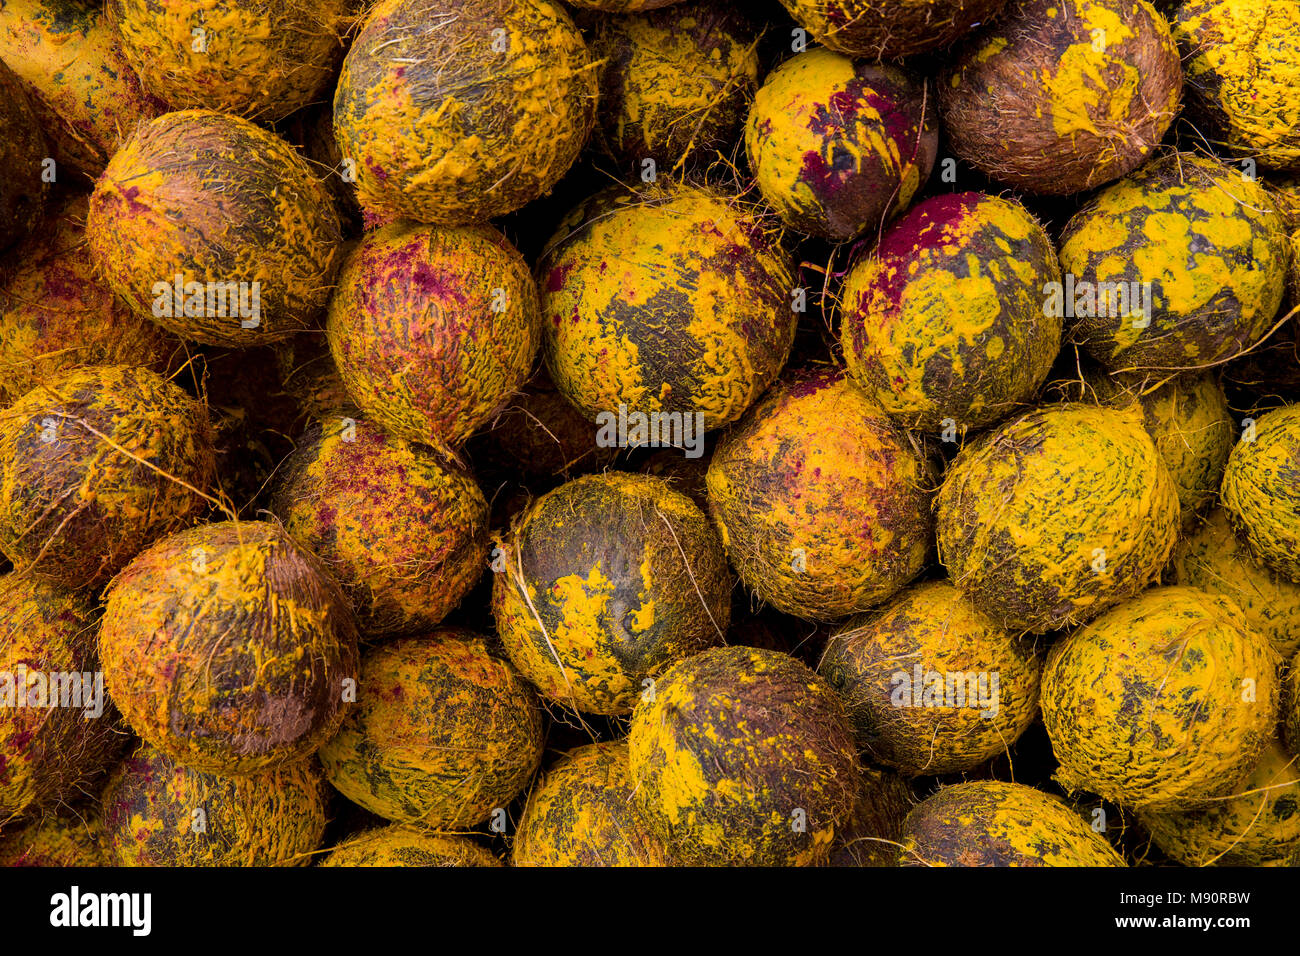 Ganesh festival in Paris. Coconuts that will be broken by devotees. France. Stock Photo